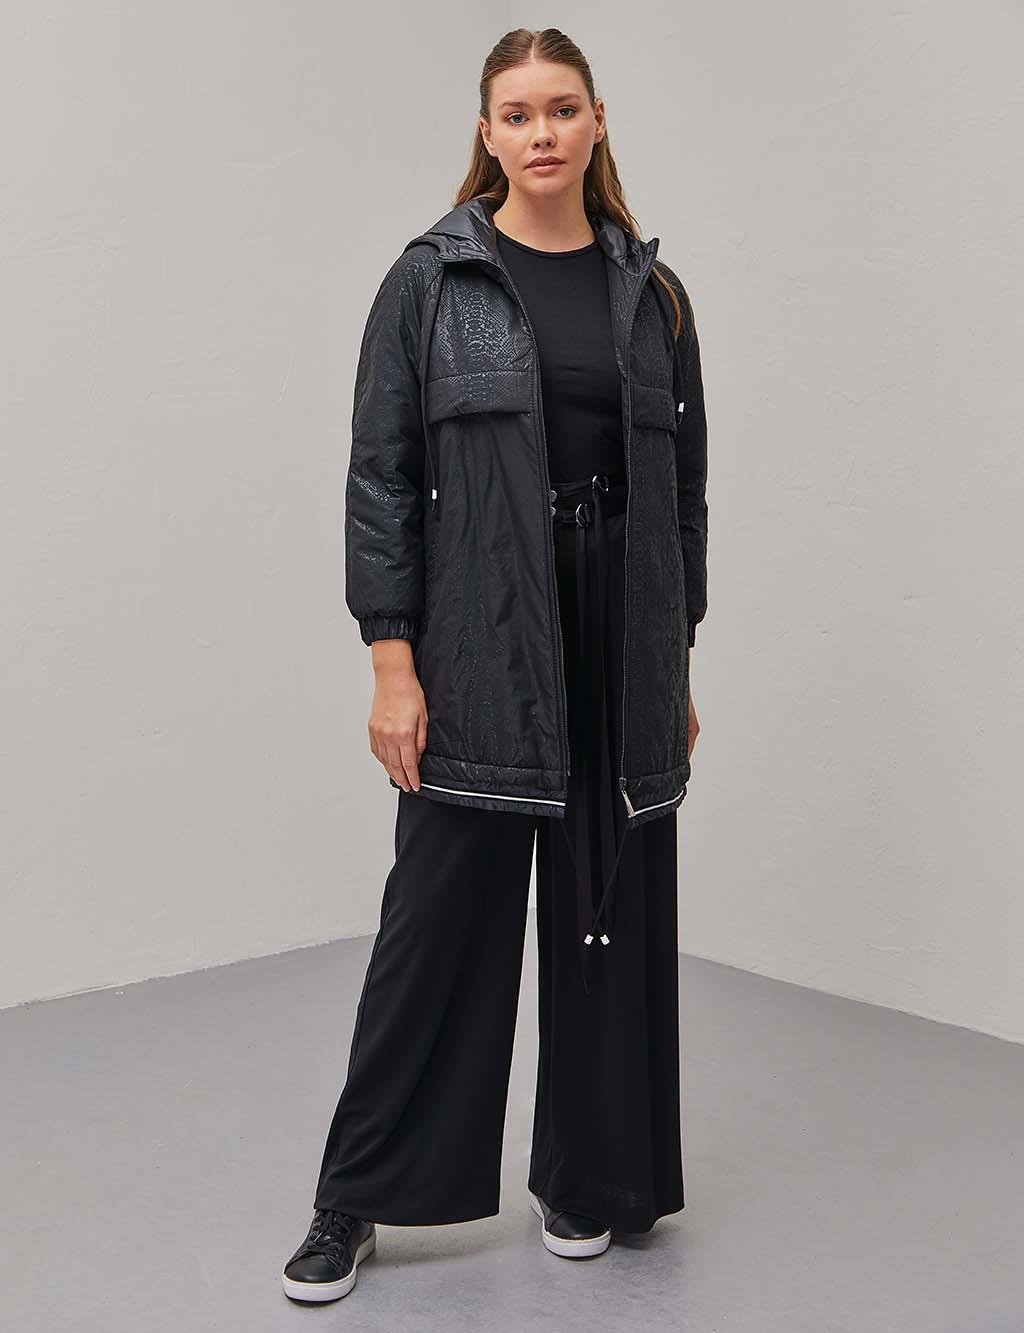 Textured Sports Wear and Go Black